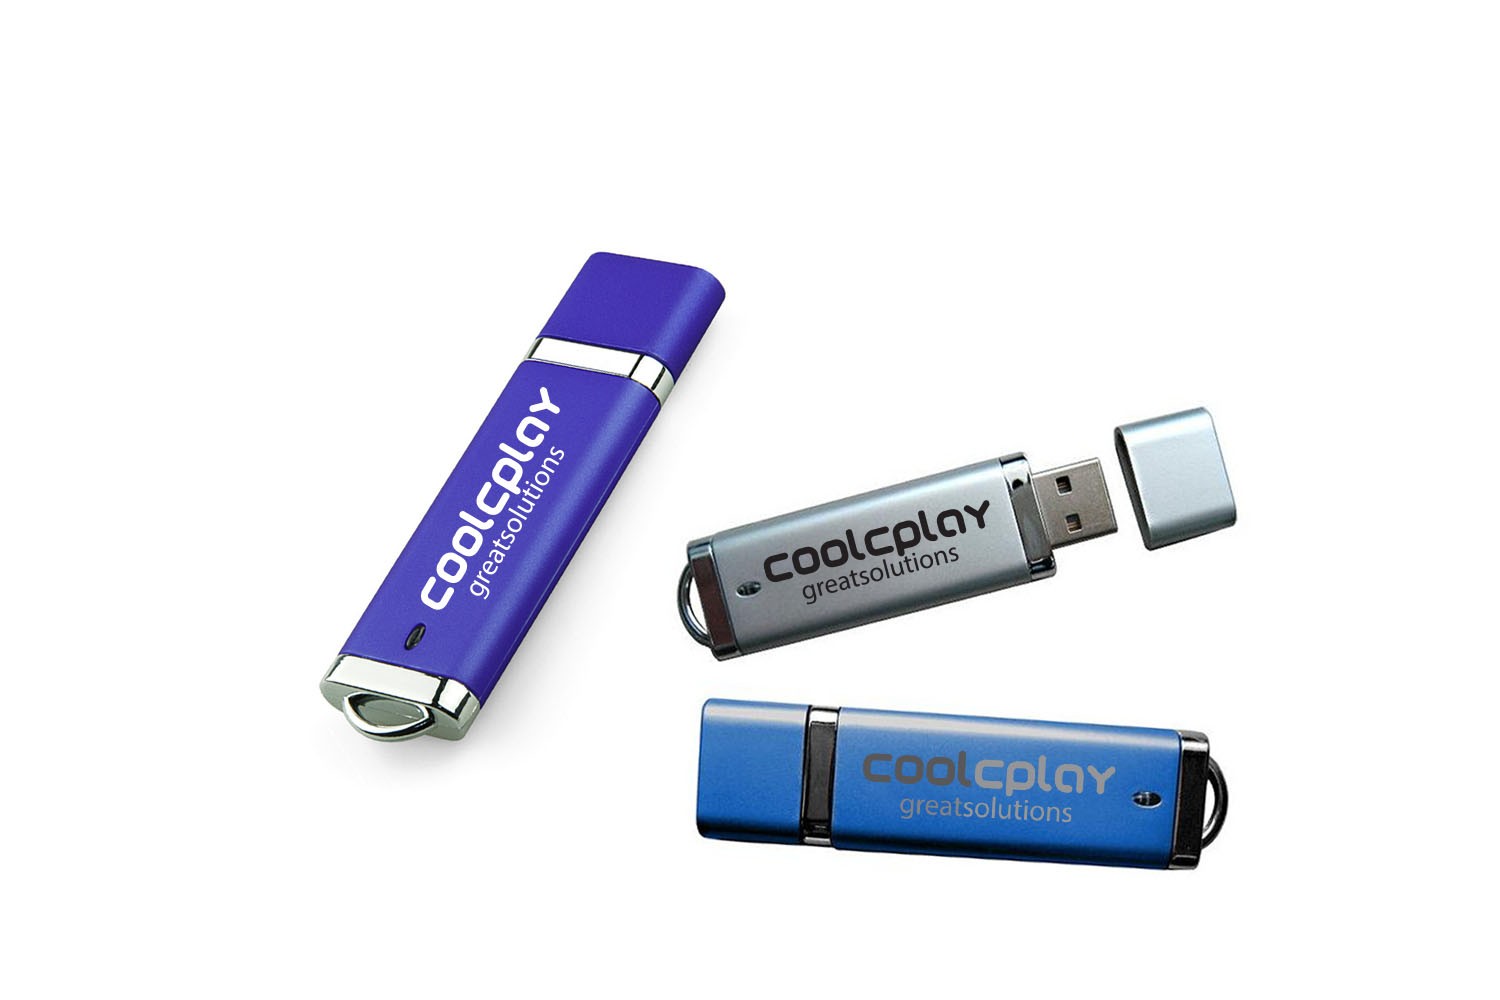 16 GB USB Flashdrive With Removable Cap